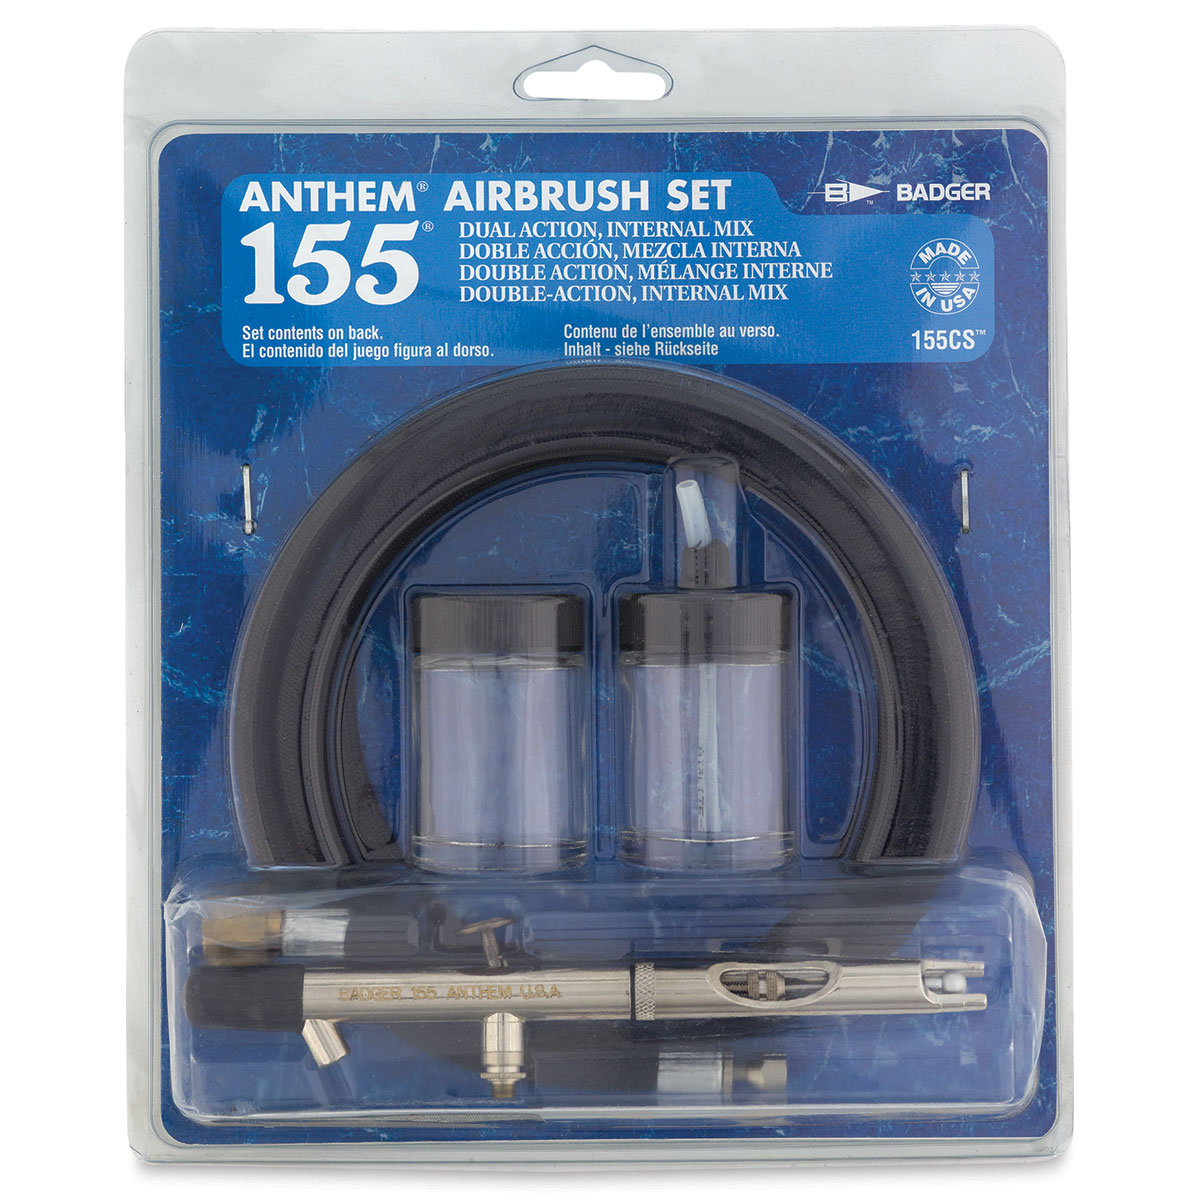 Badger Air-Brush Co 155-7 Anthem Airbrush Complete Set,  price  tracker / tracking,  price history charts,  price watches,   price drop alerts